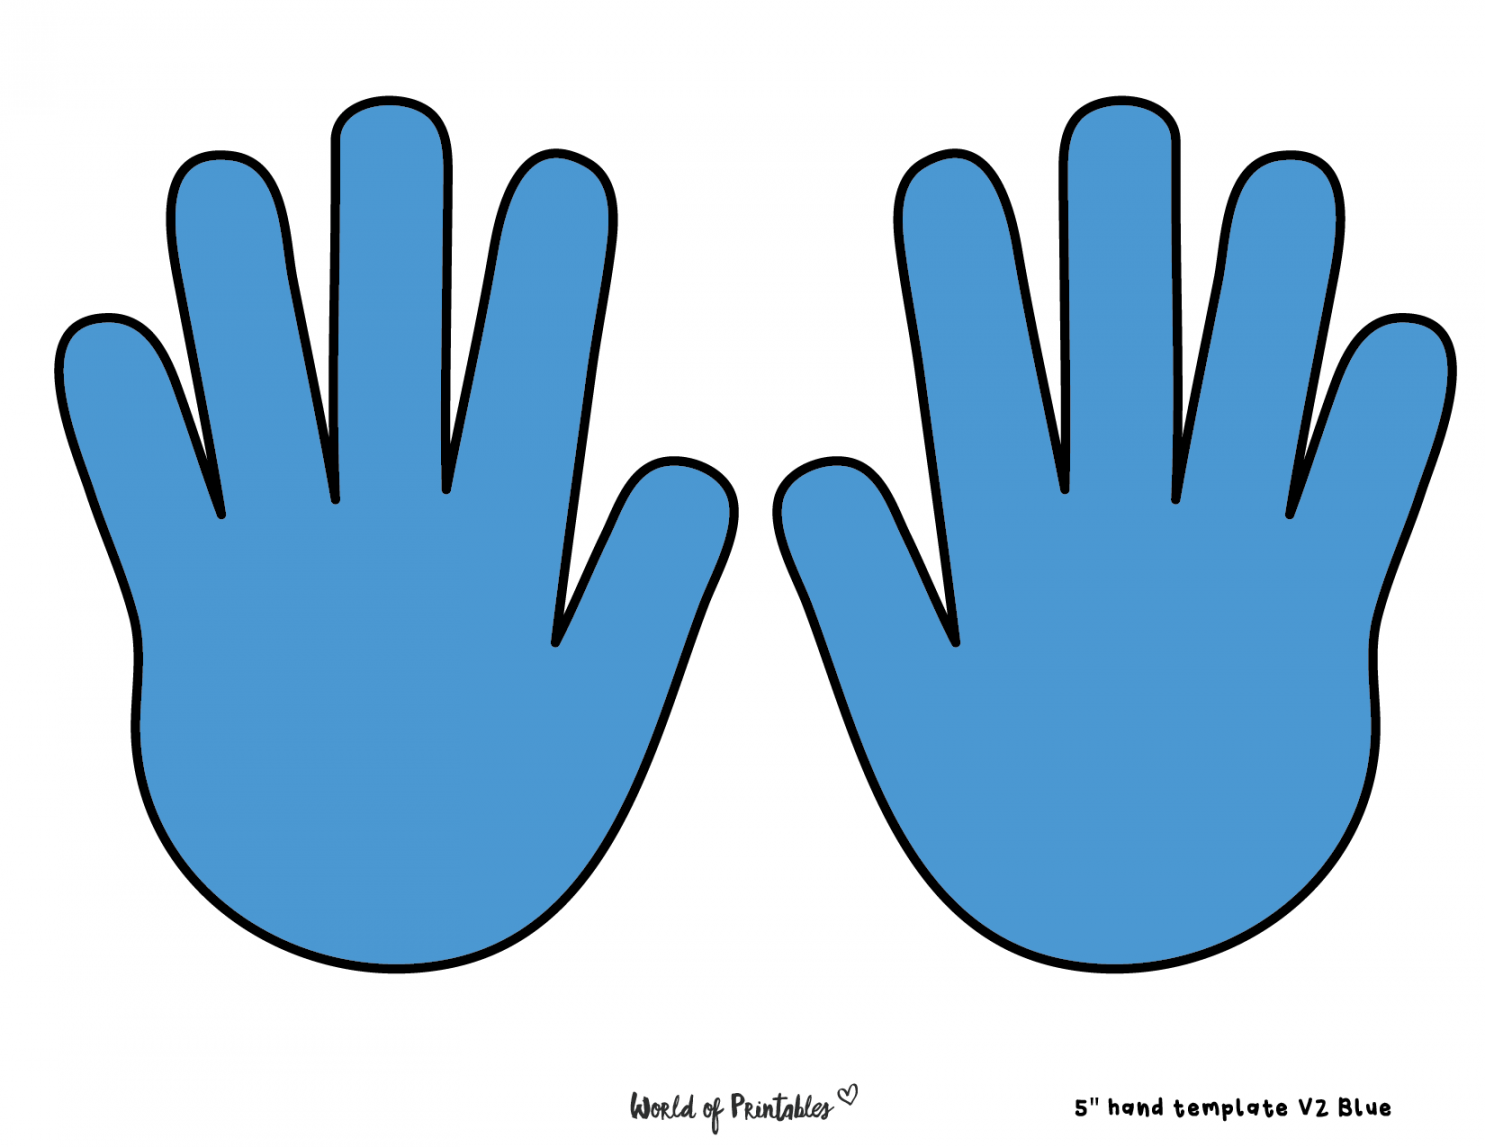 Hand Outline Printable Templates - World of Printables - FREE Printables - Hand Cut Outs